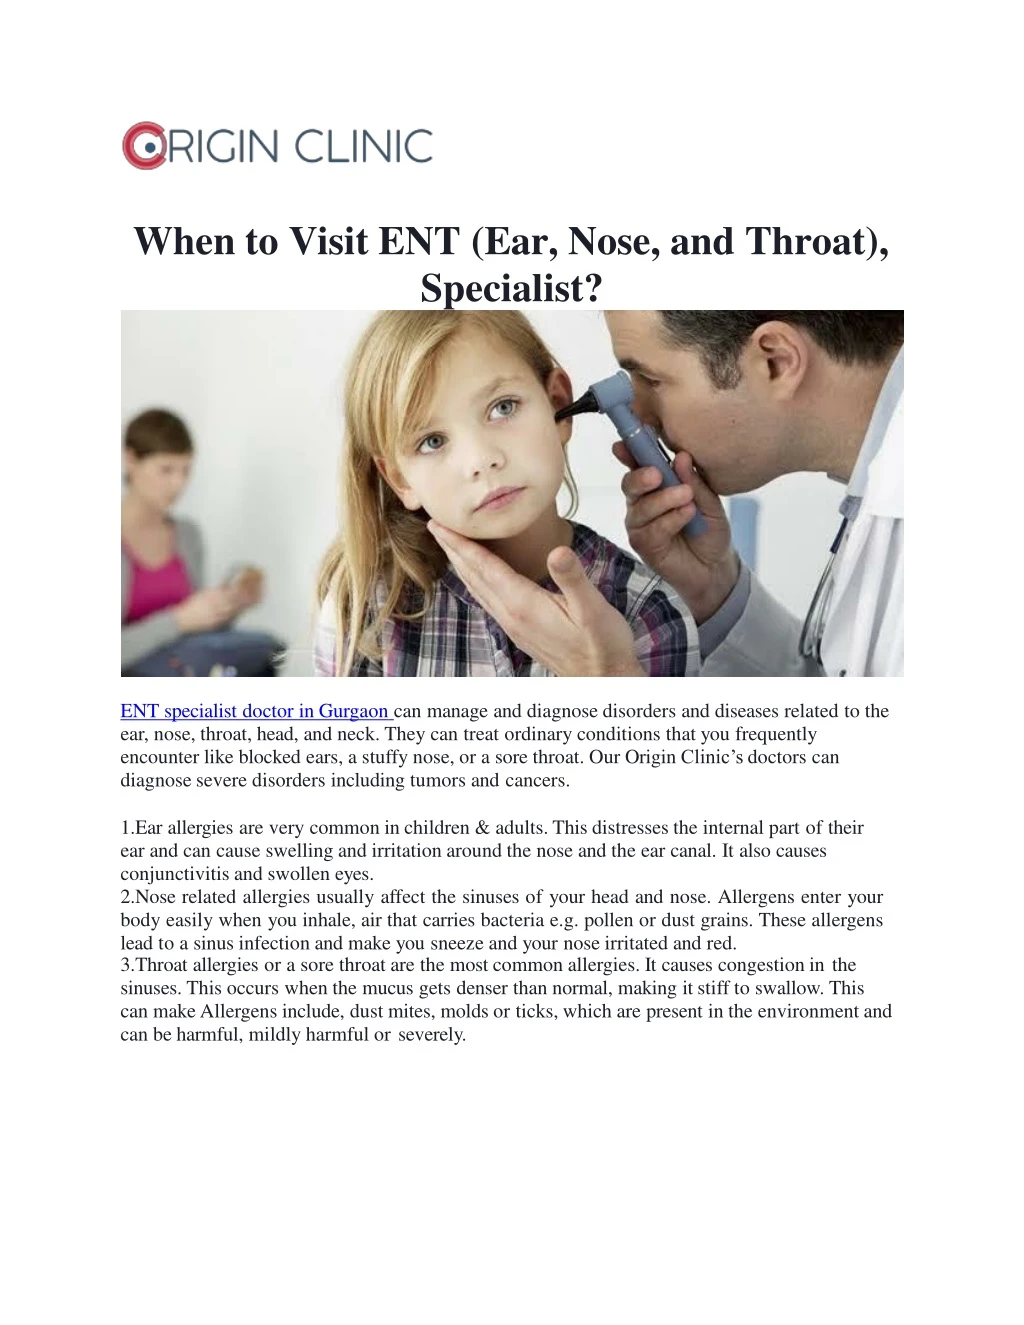 when to visit ent ear nose and throat specialist